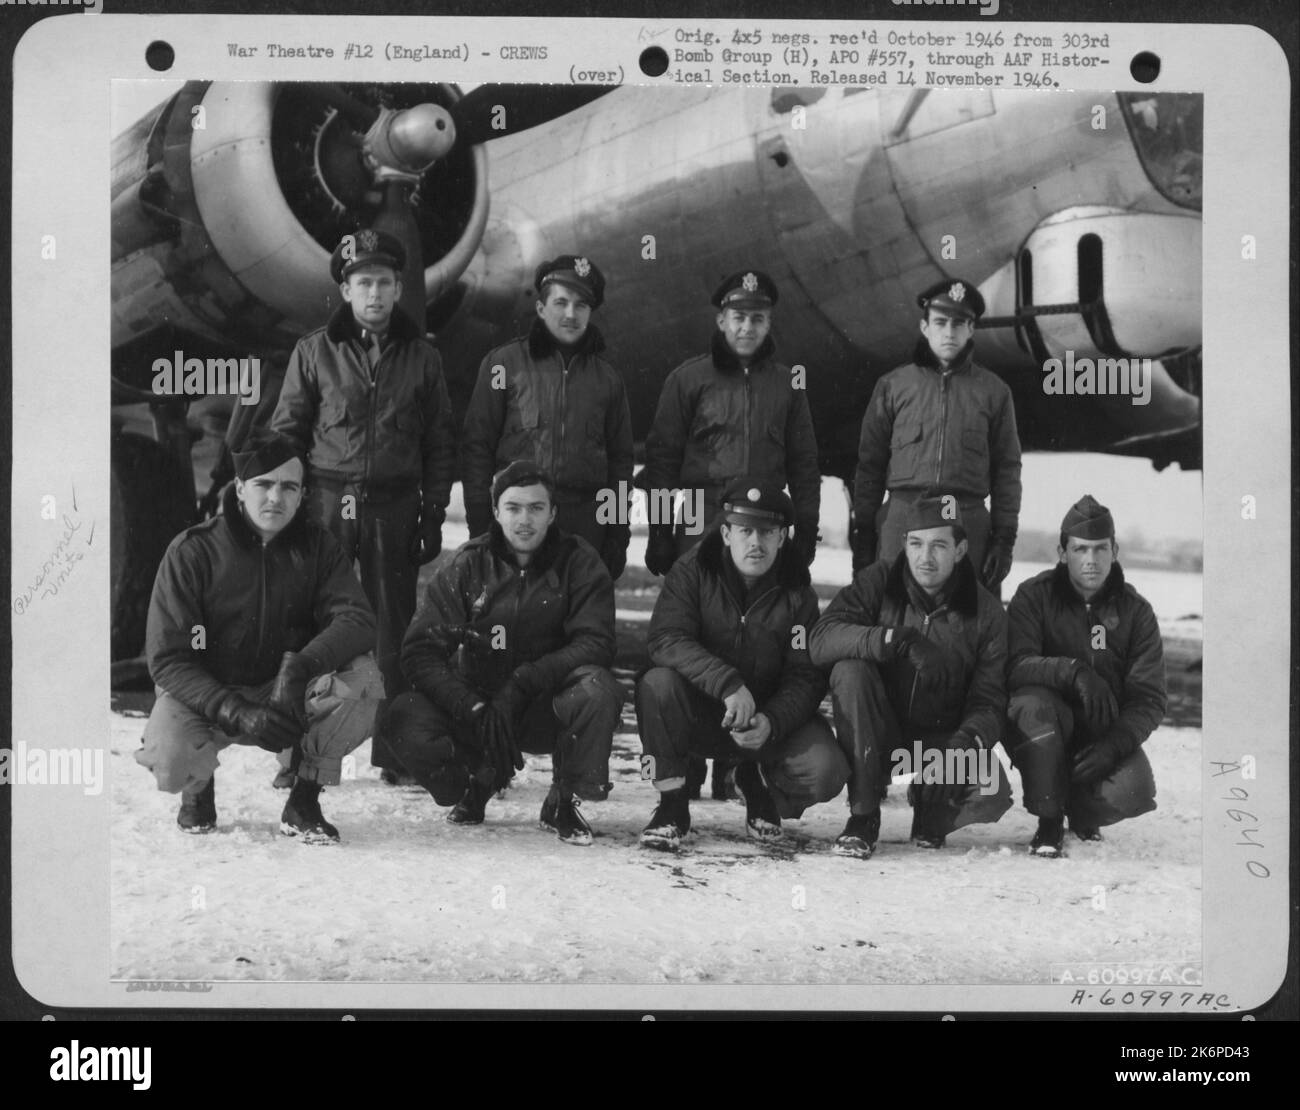 Lt. Austin And Crew Of The 360Th Bomb Squadron, 303Rd Bomb Group, Beside A Boeing B-17 Flying Fortress. England, 28 January 1945. Stock Photo